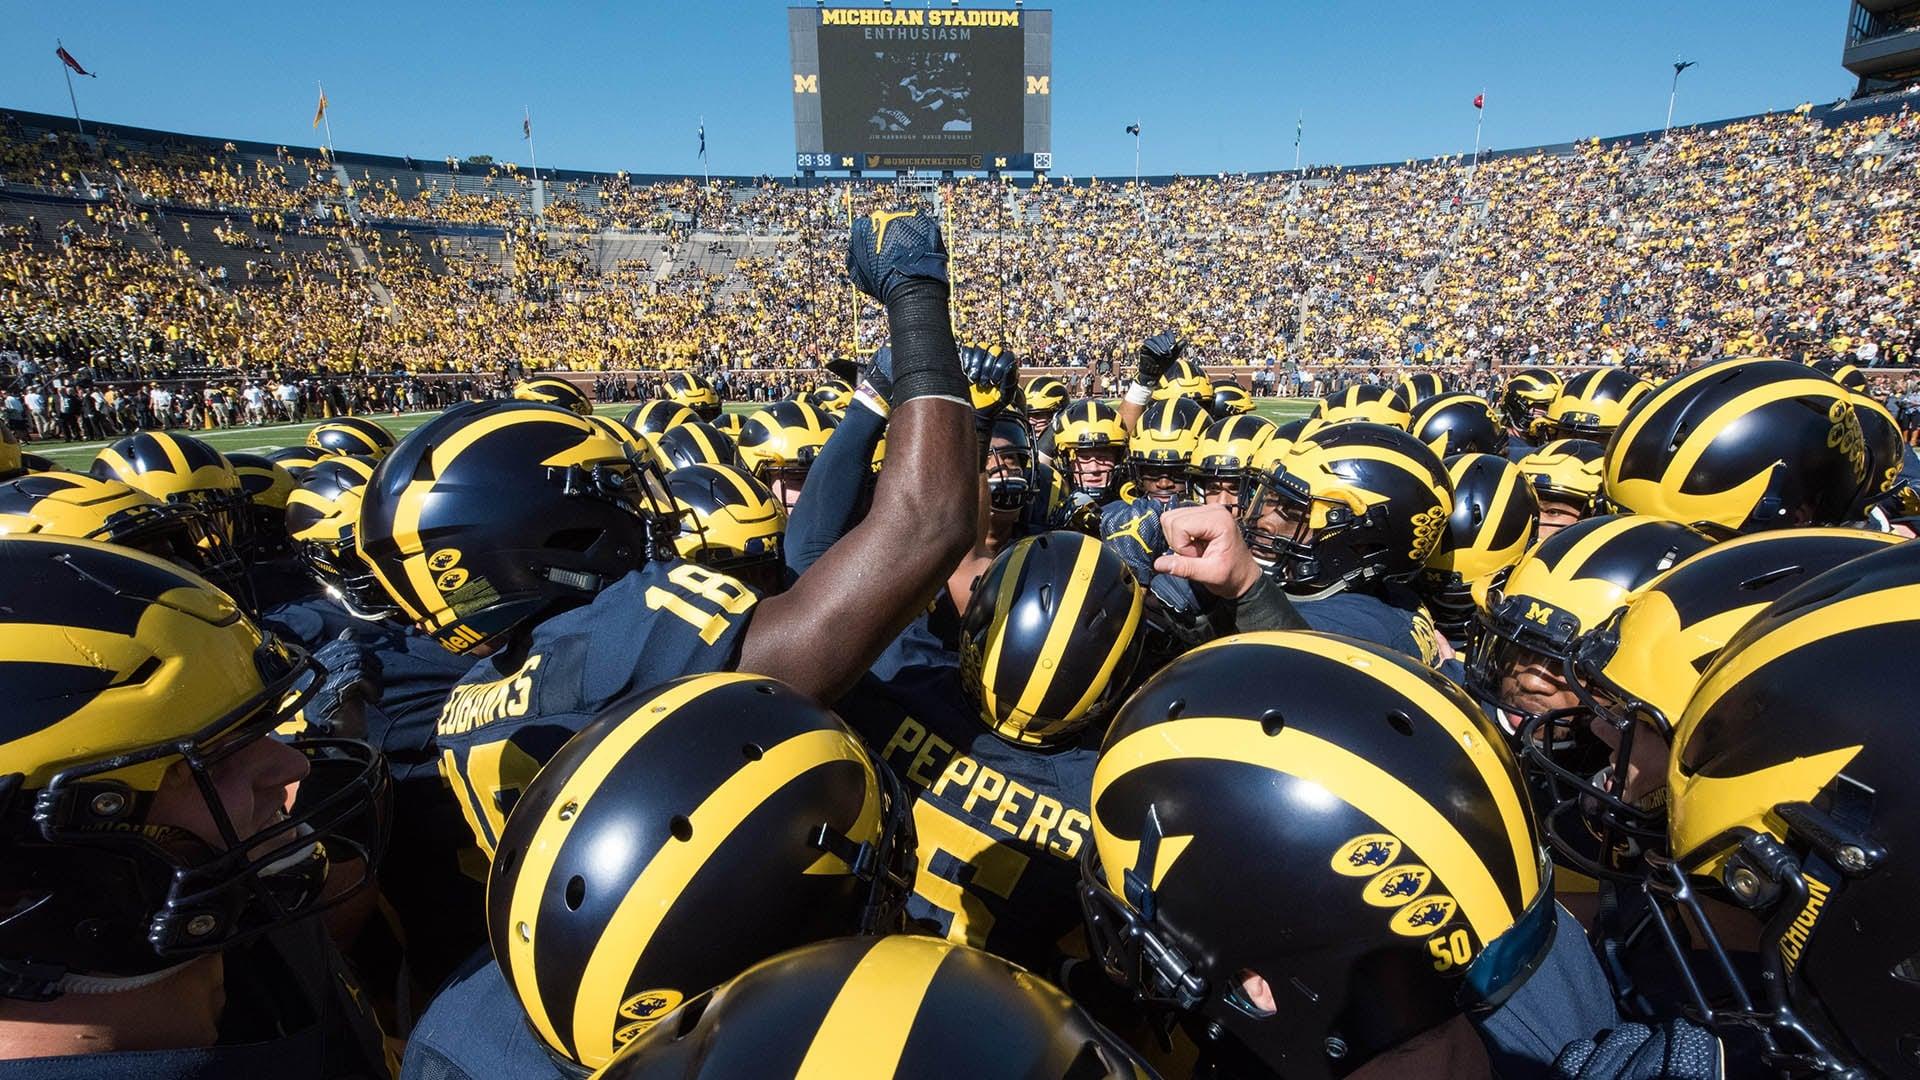 All or Nothing: The Michigan Wolverines backdrop